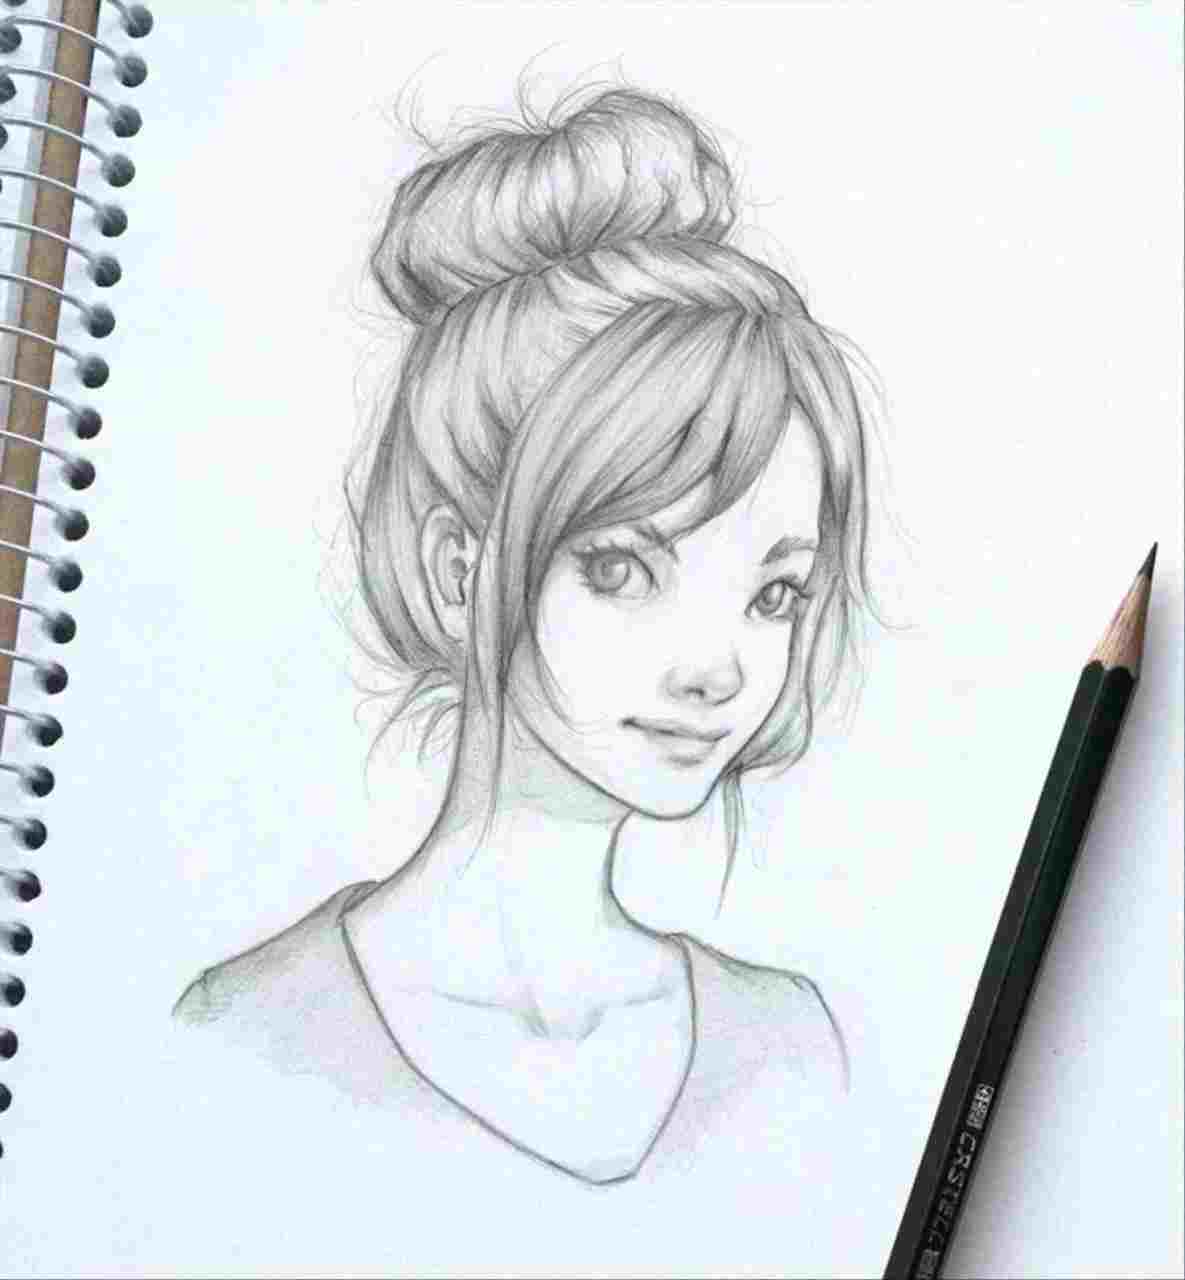 Hairstyle Sketches at PaintingValley.com | Explore collection of ...